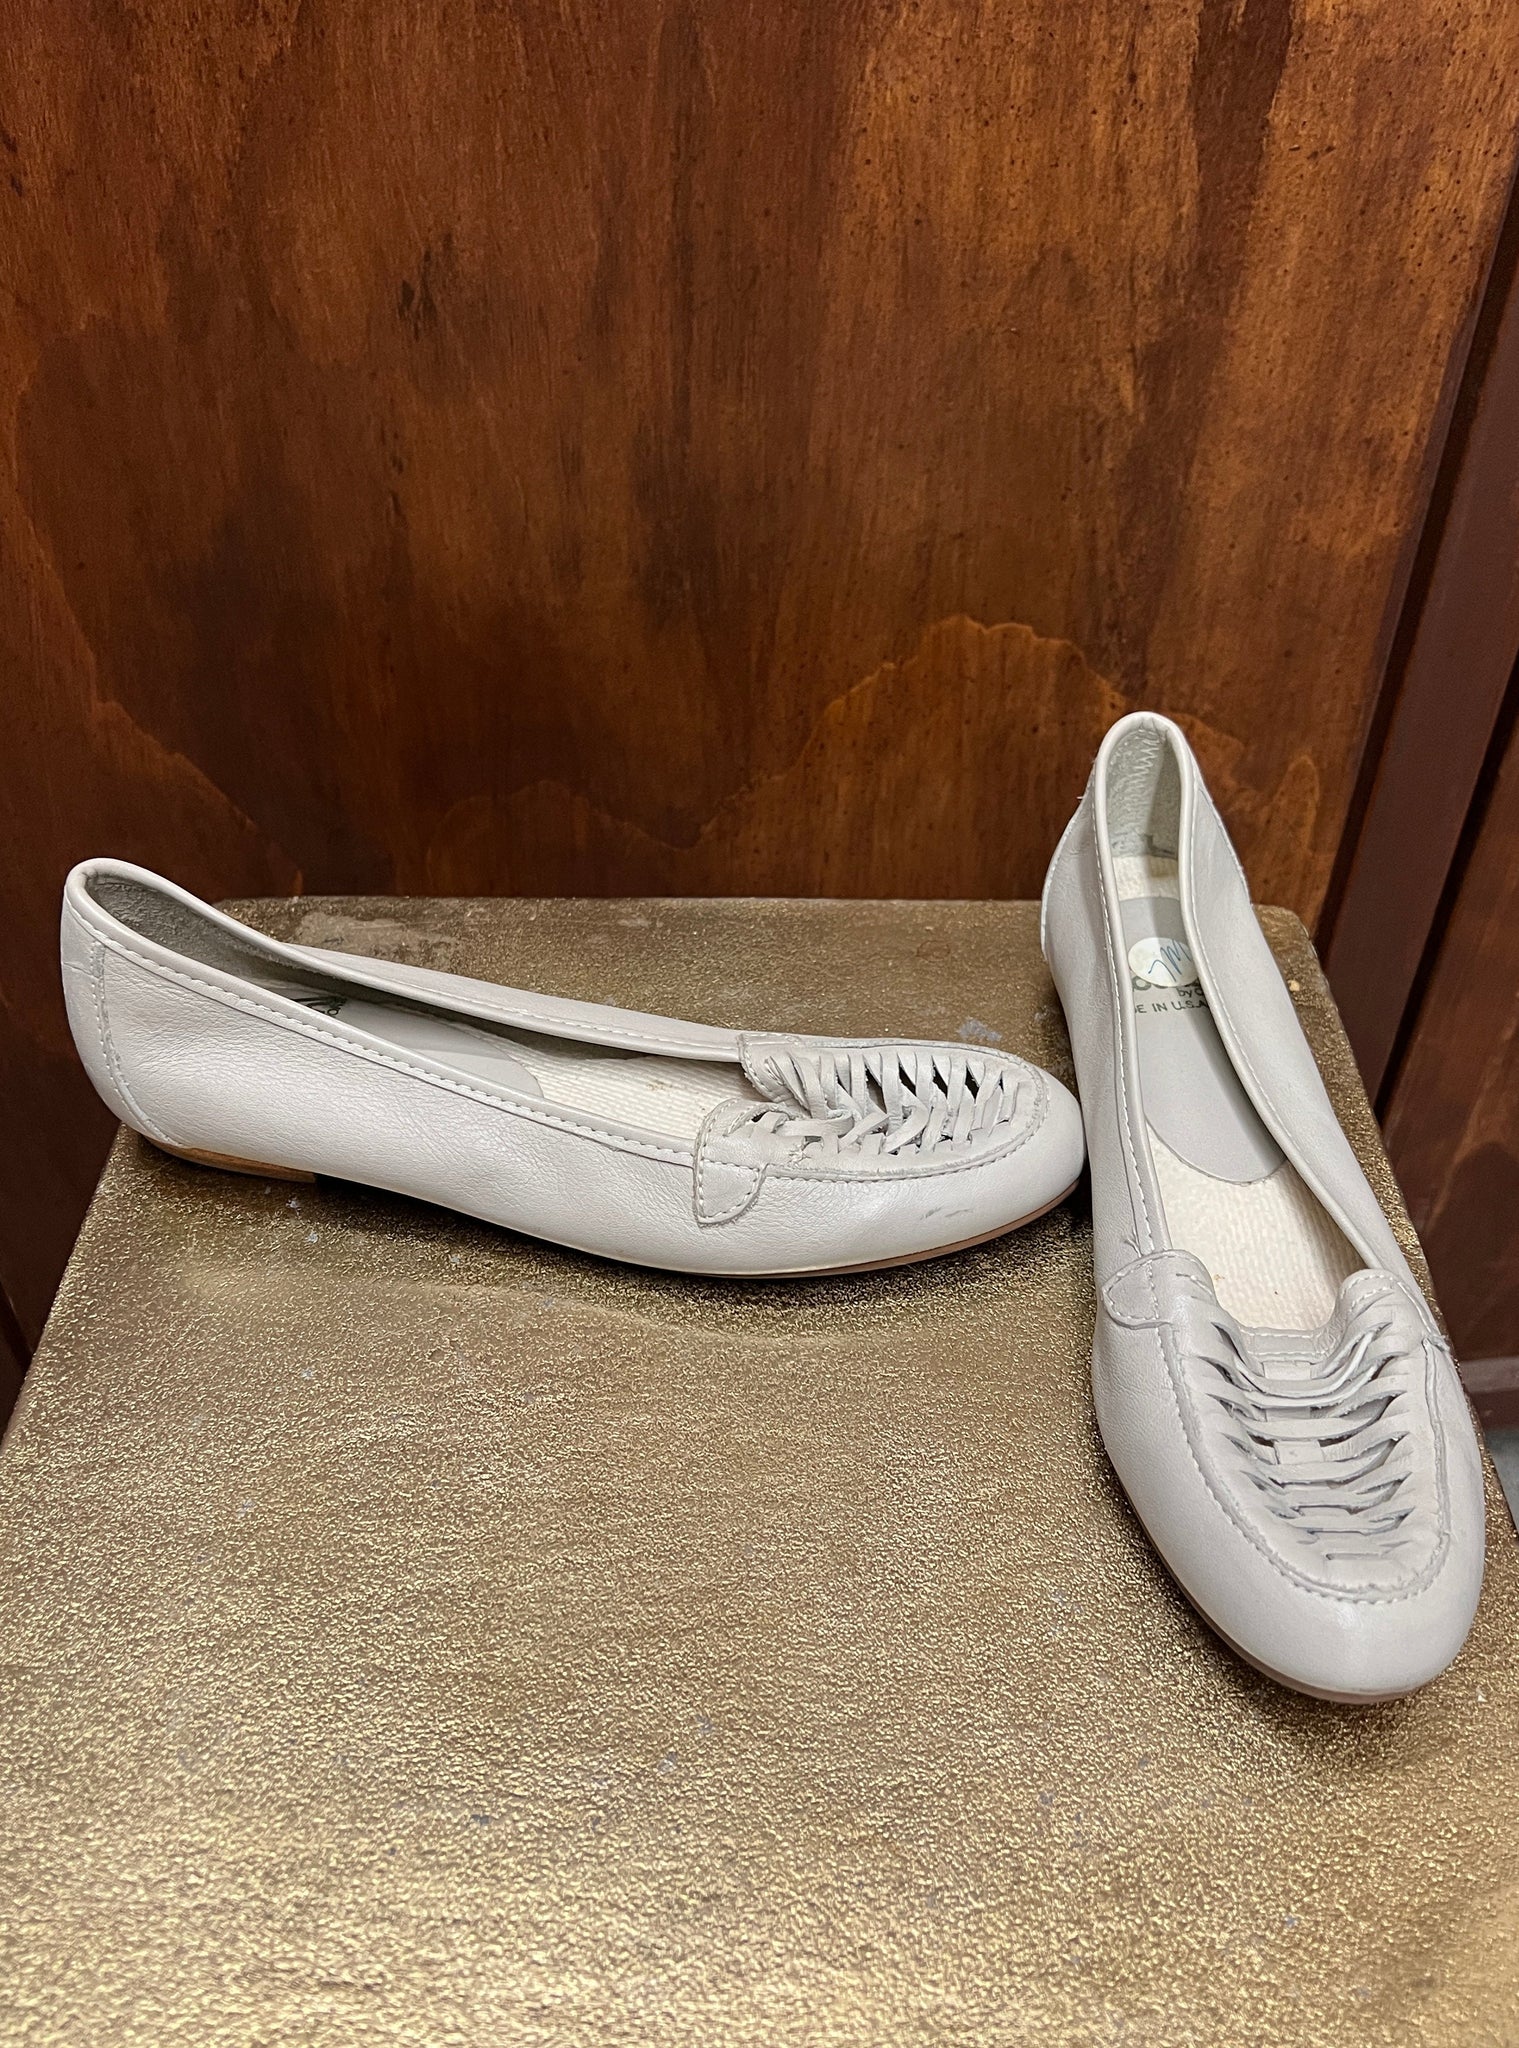 1990s SHOES- White Mountain dove grey loafer flat